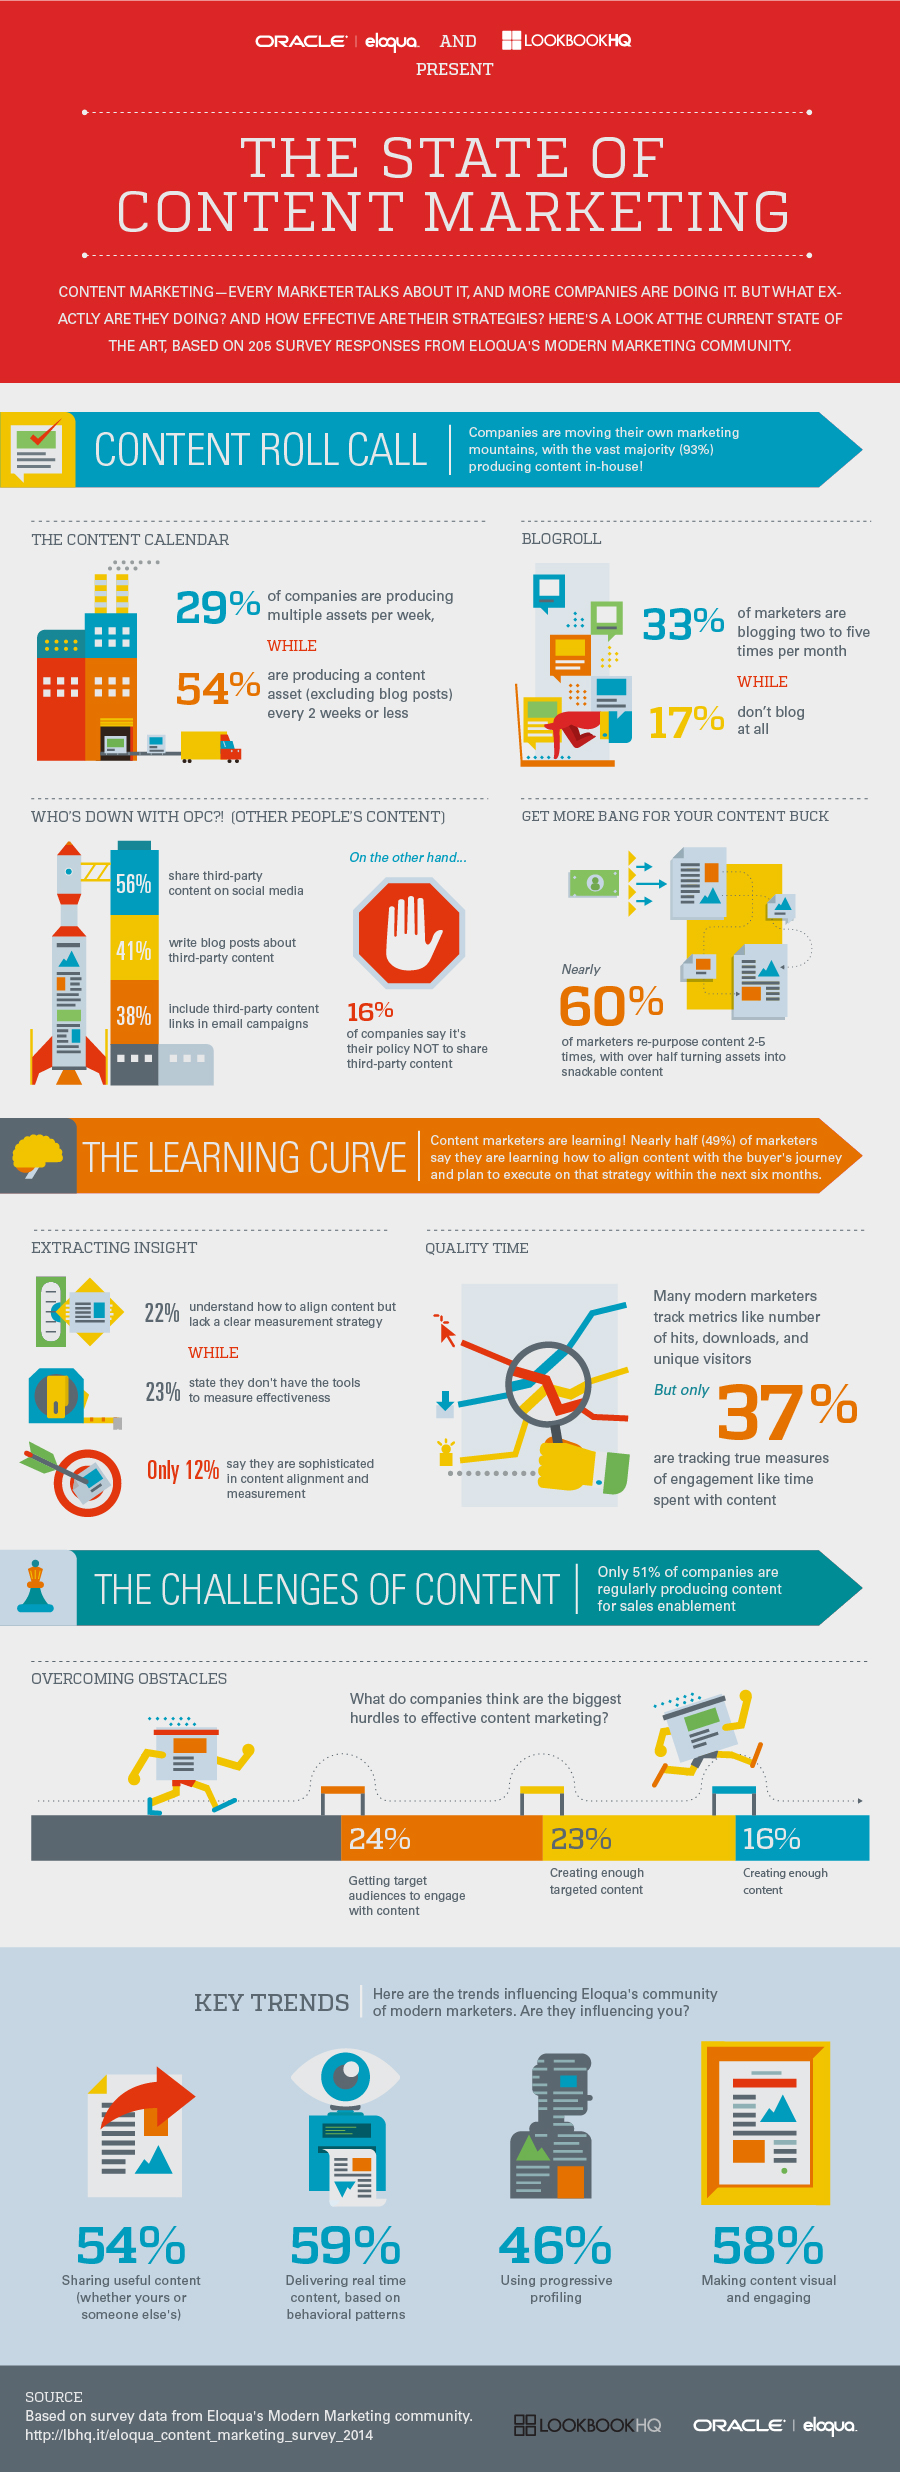 State-of-Content-Marketing-2014_Infographic-FV